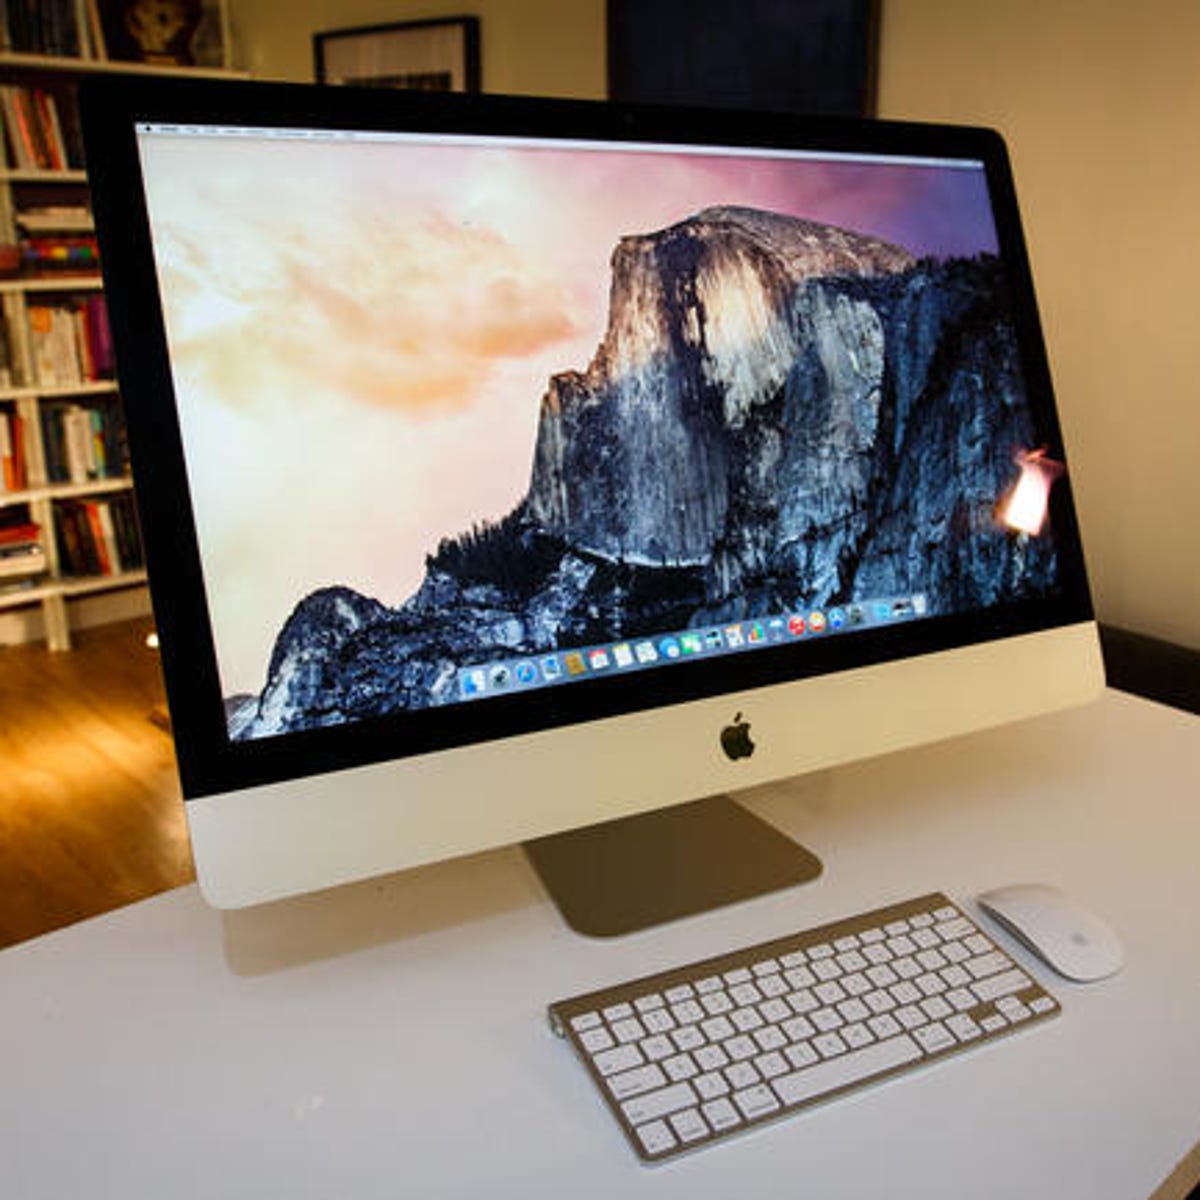 iMac with 5K Retina display (27-inch) review: Apple's 5K iMac impresses eyes (review) - CNET